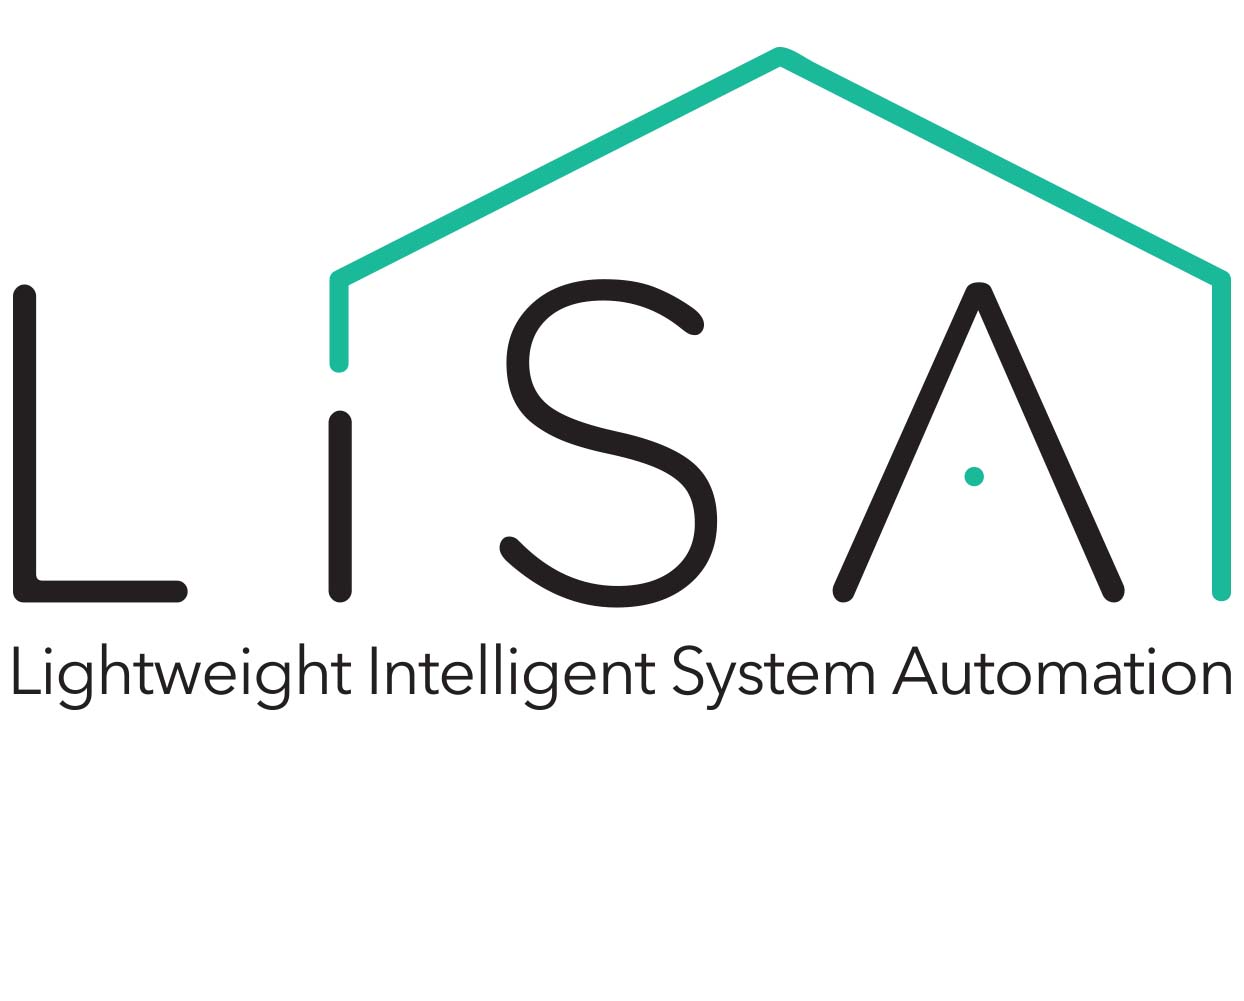 Hack4Europe: ENGIE rewards L.I.S.A., the home automation box that connects everyday objects